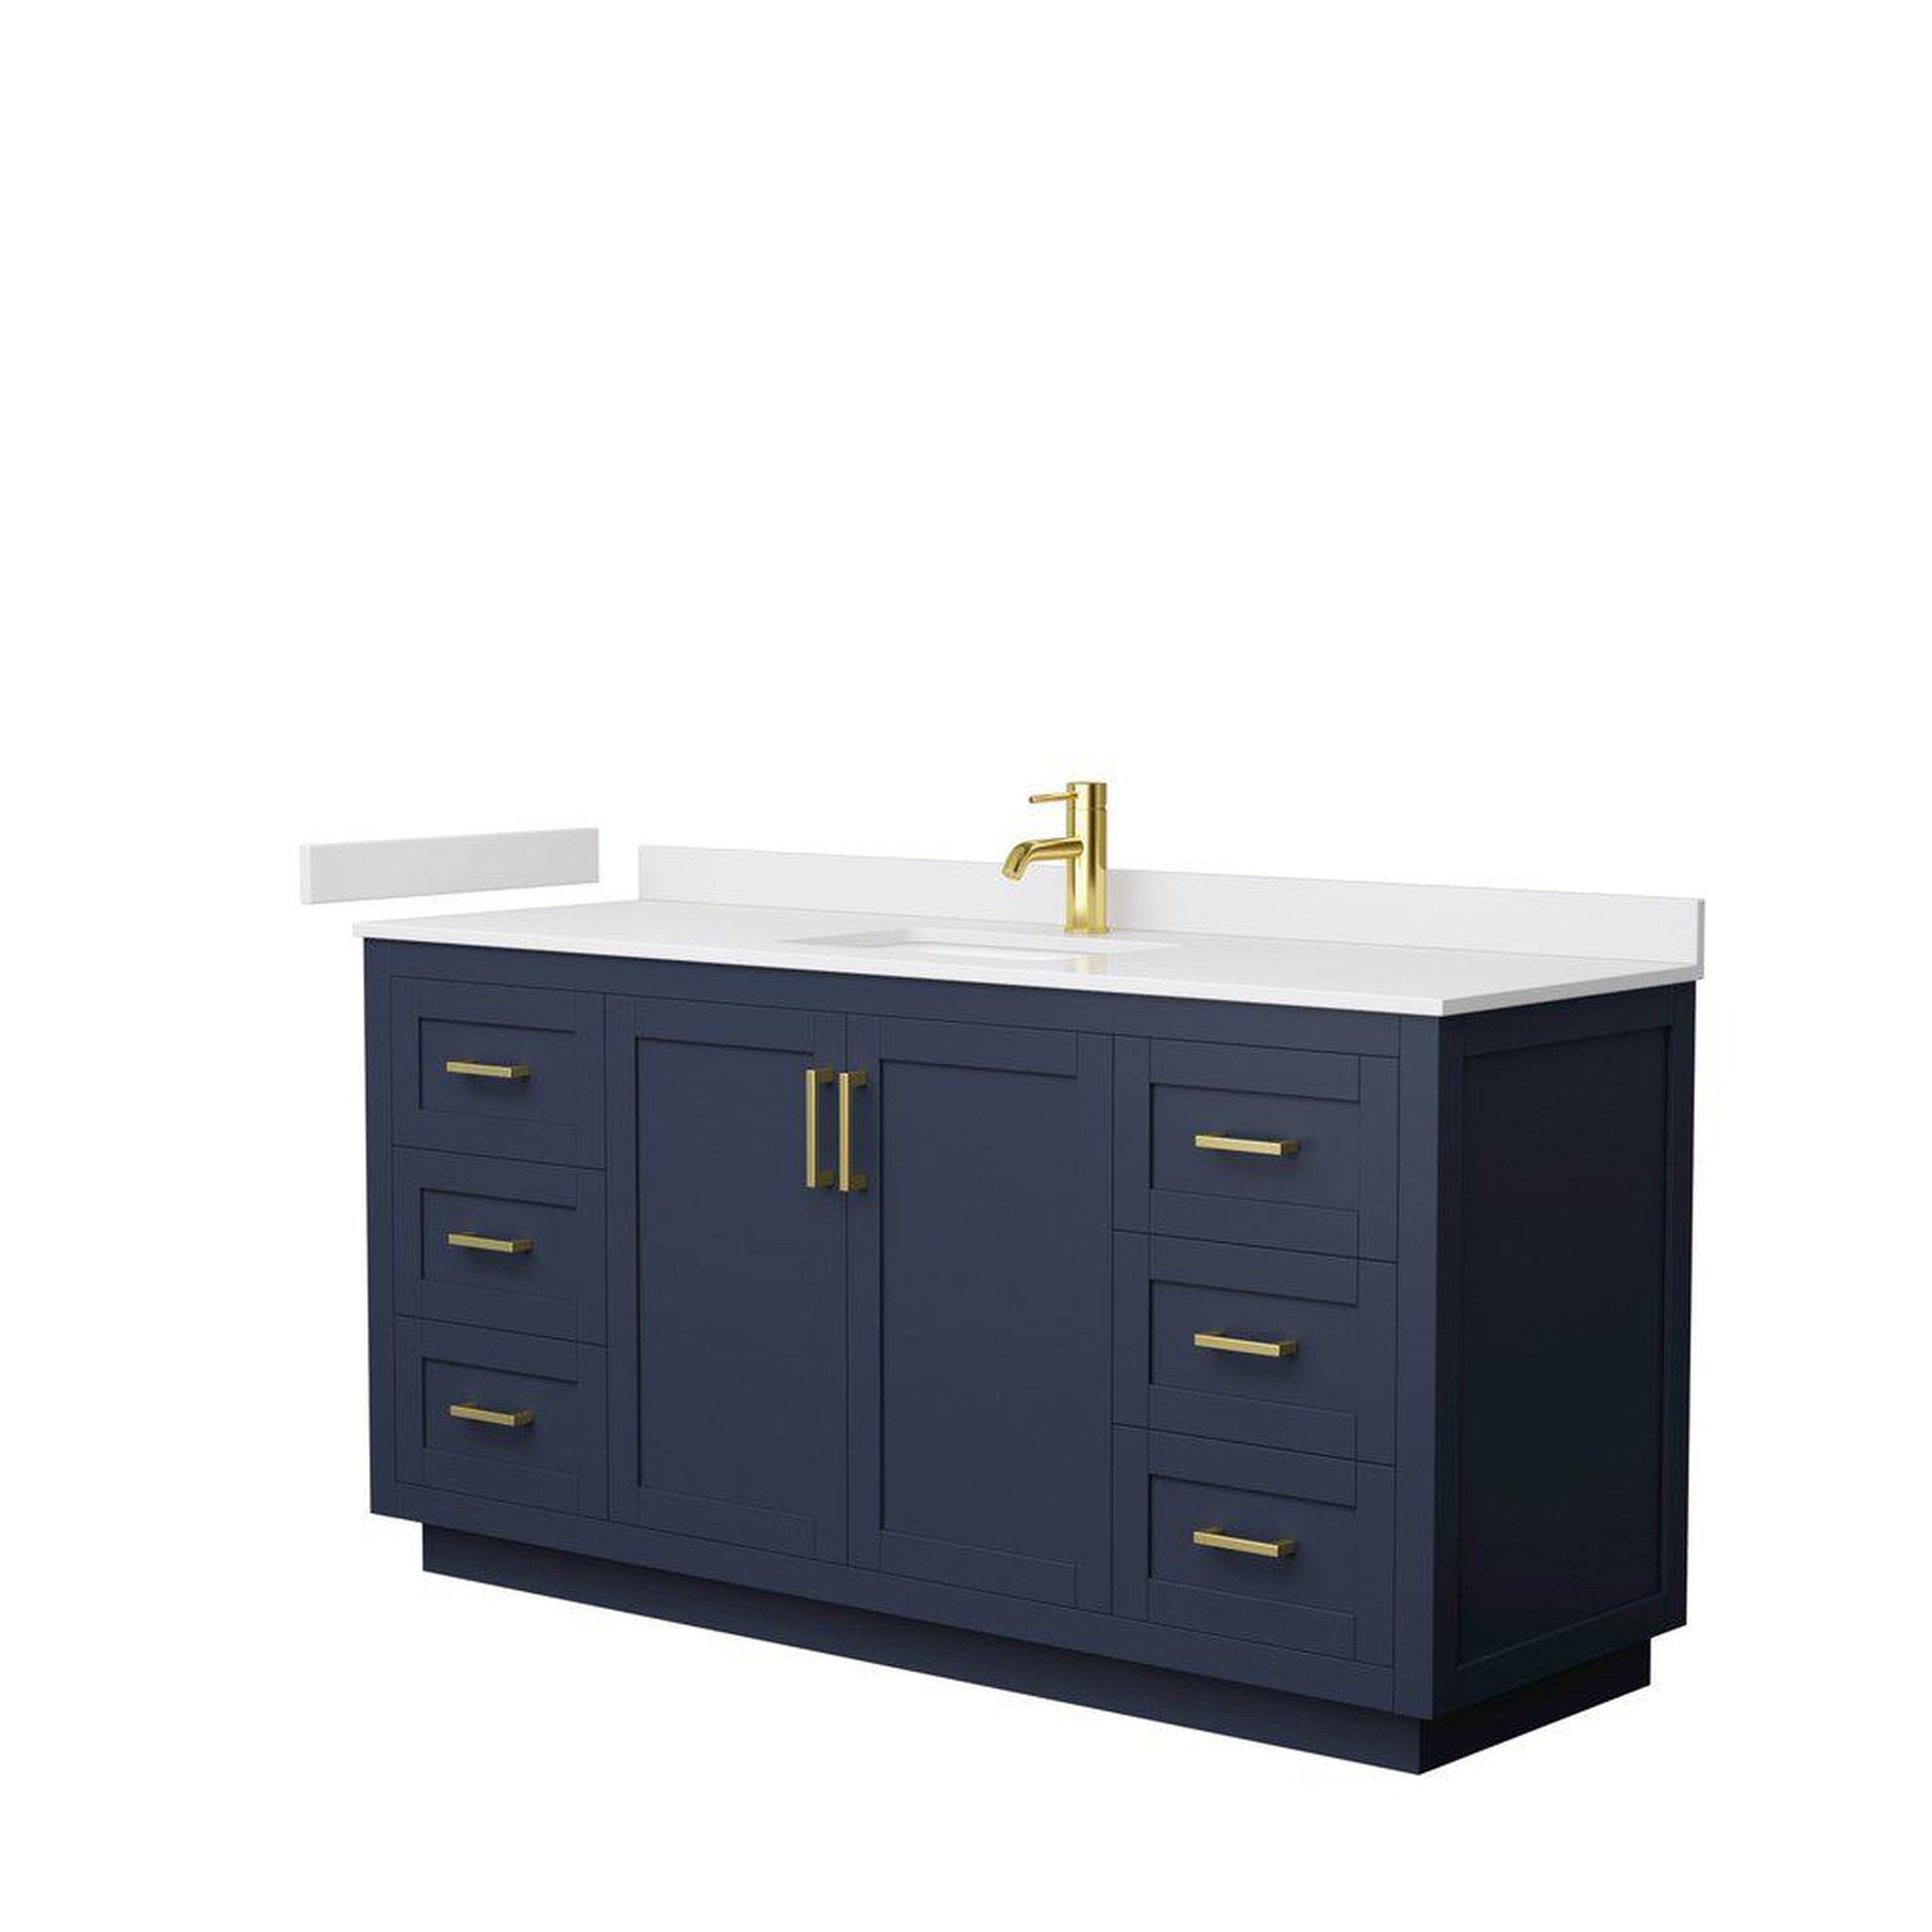 Wyndham Collection Miranda 66" Single Bathroom Dark Blue Vanity Set With White Cultured Marble Countertop, Undermount Square Sink, And Brushed Gold Trim